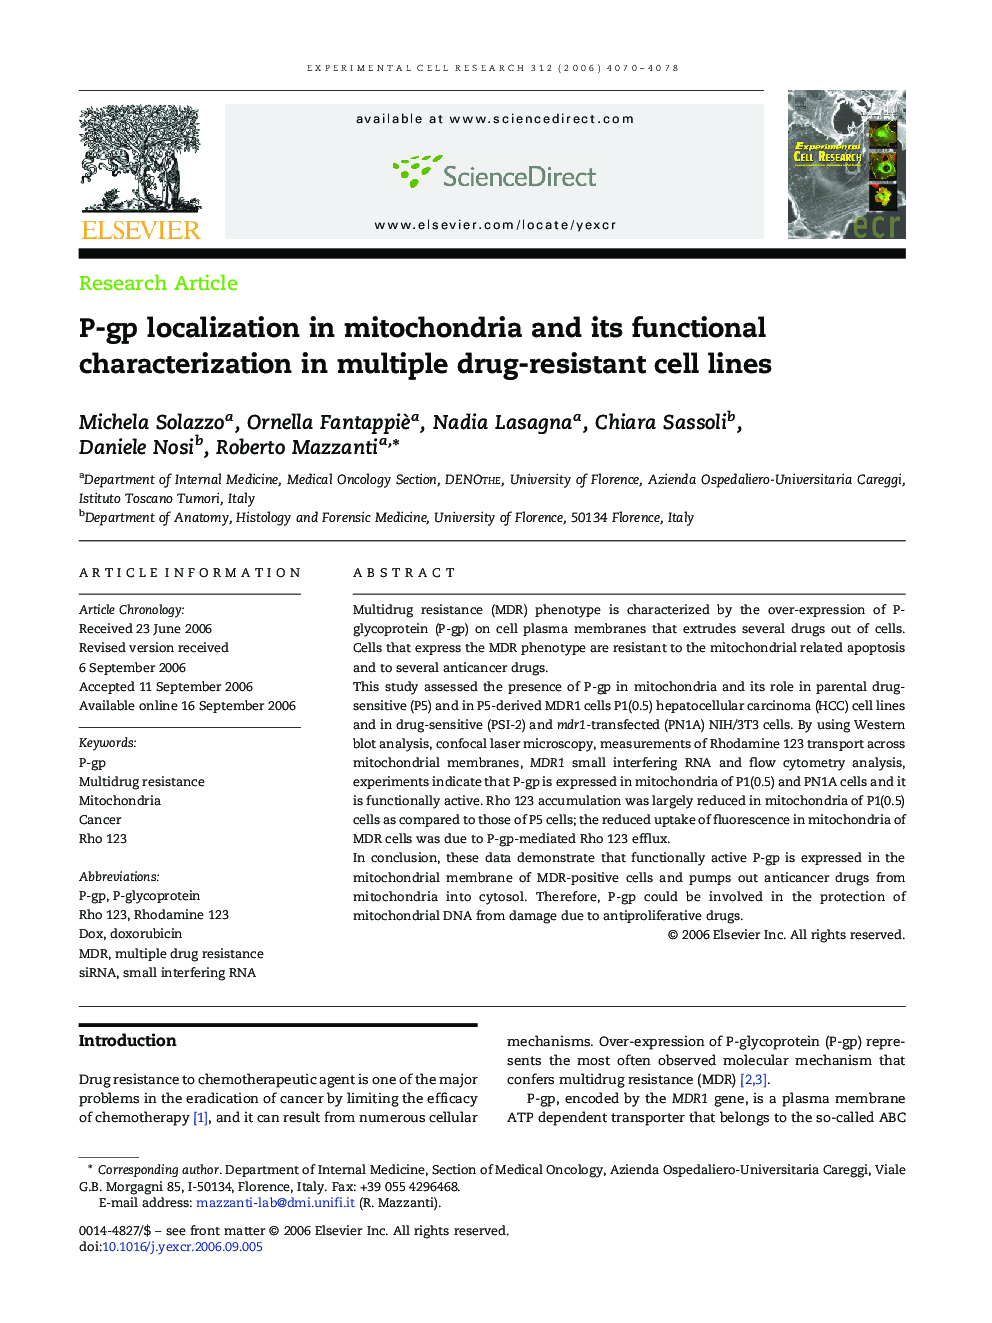 P-gp localization in mitochondria and its functional characterization in multiple drug-resistant cell lines